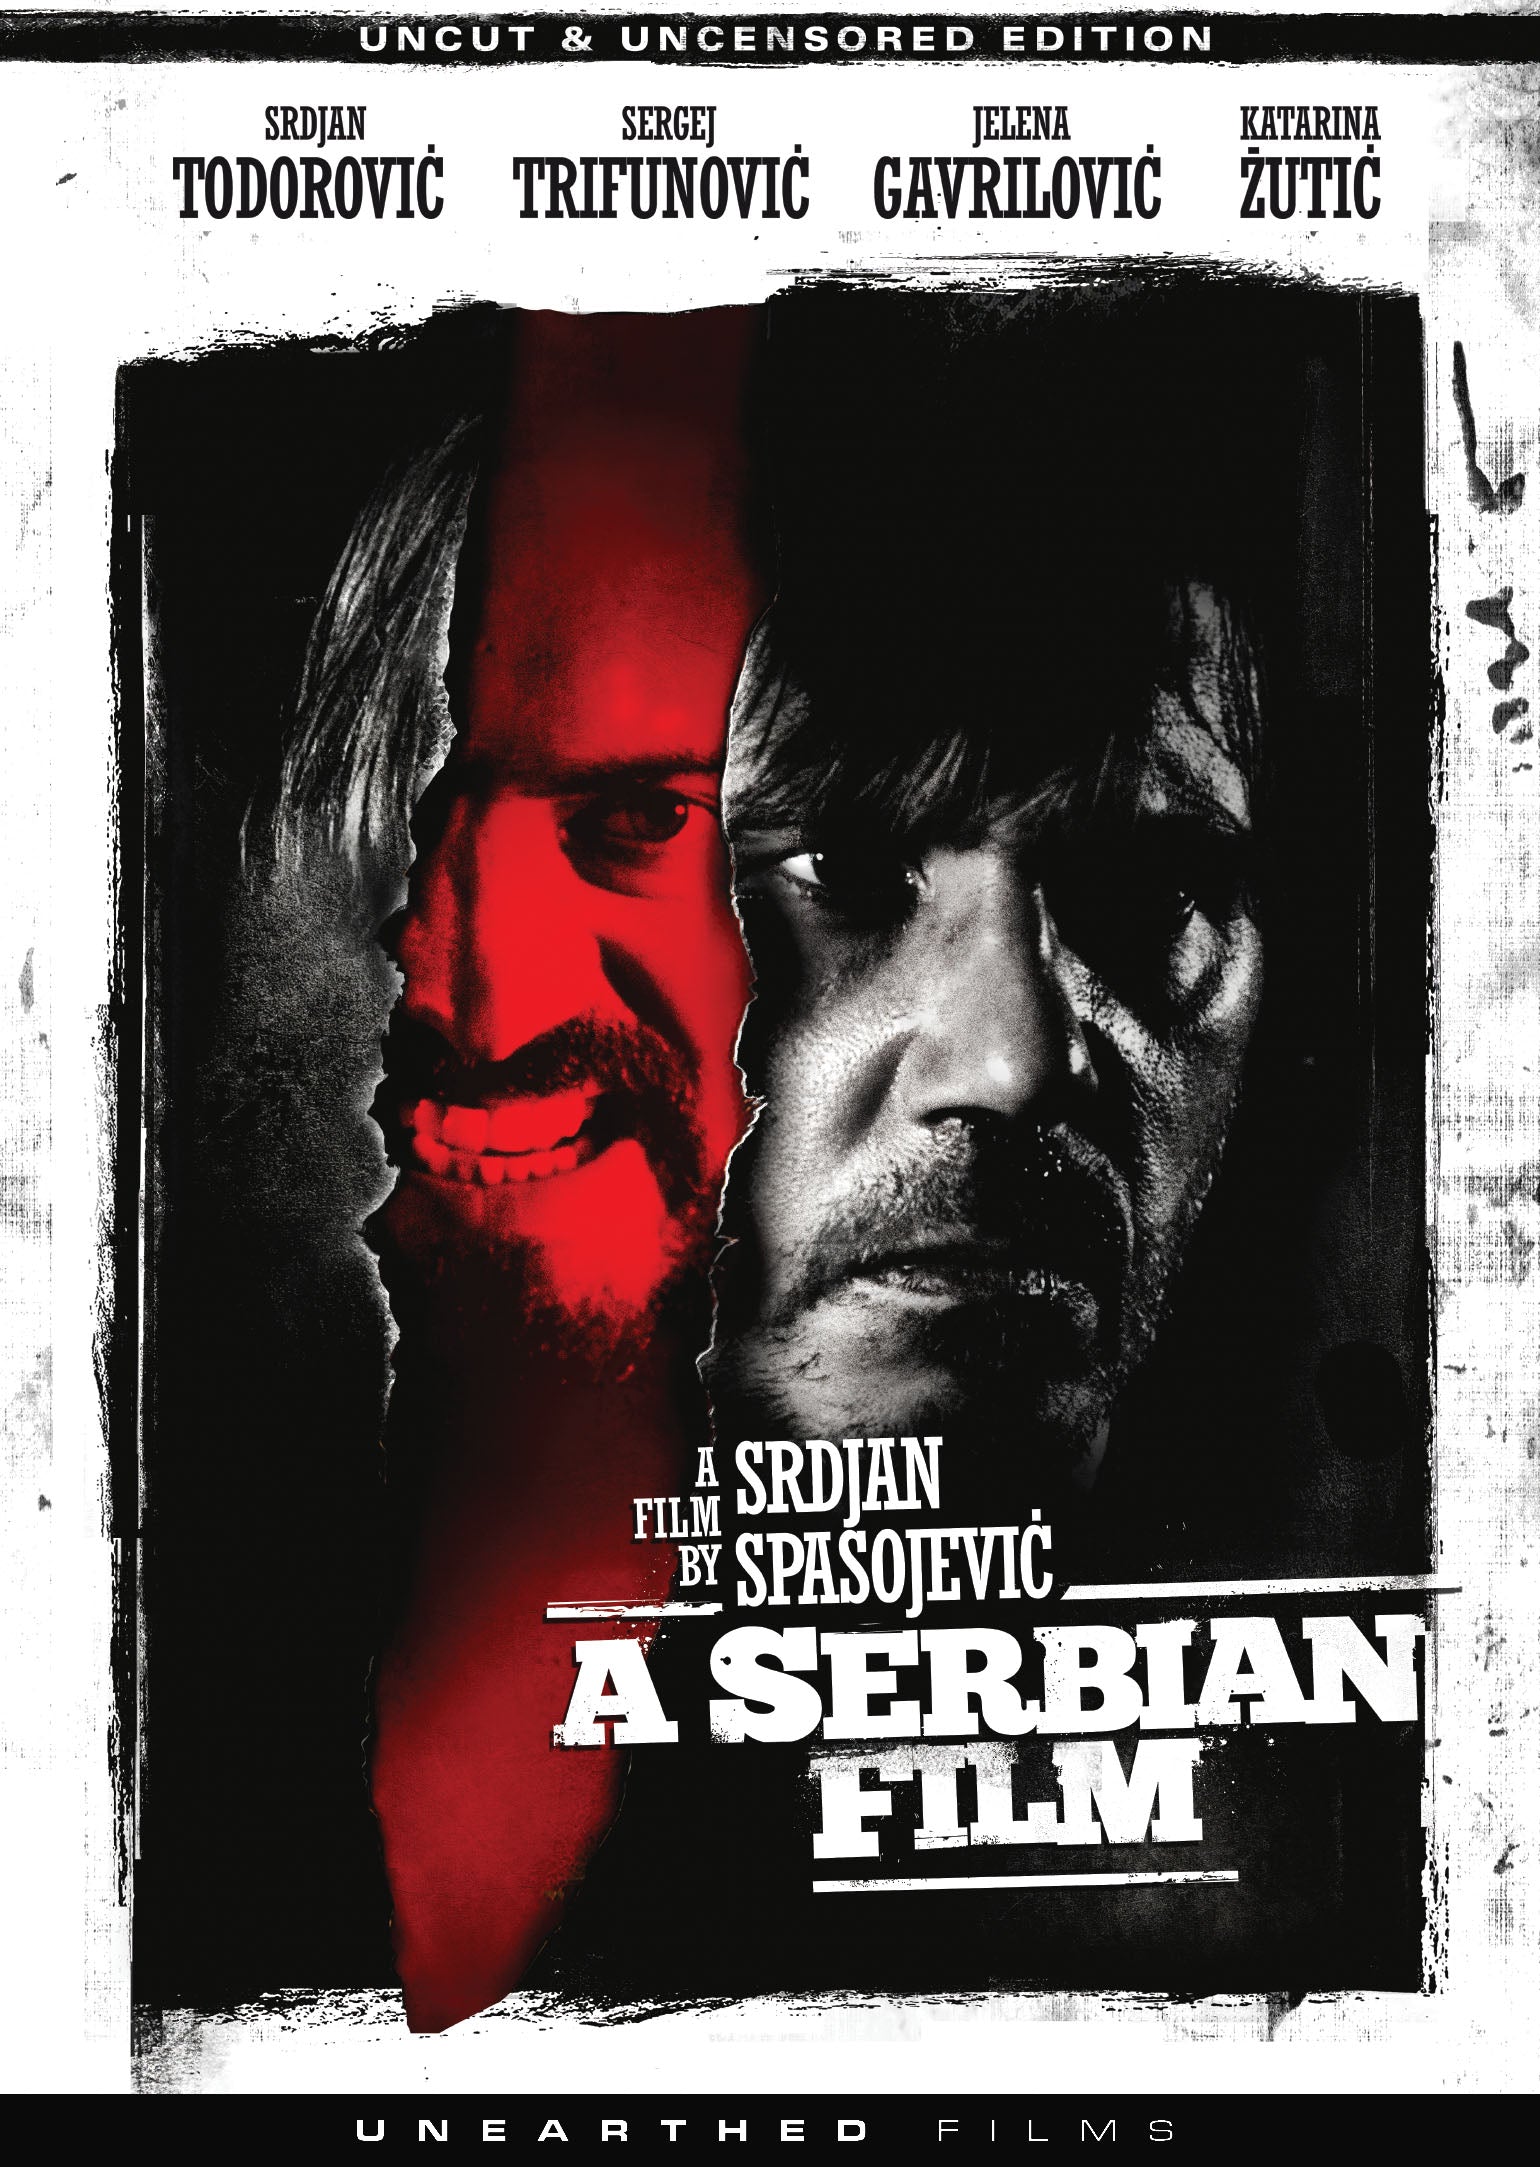 A Serbian Film (Uncut And Uncensored Edition) Dvd